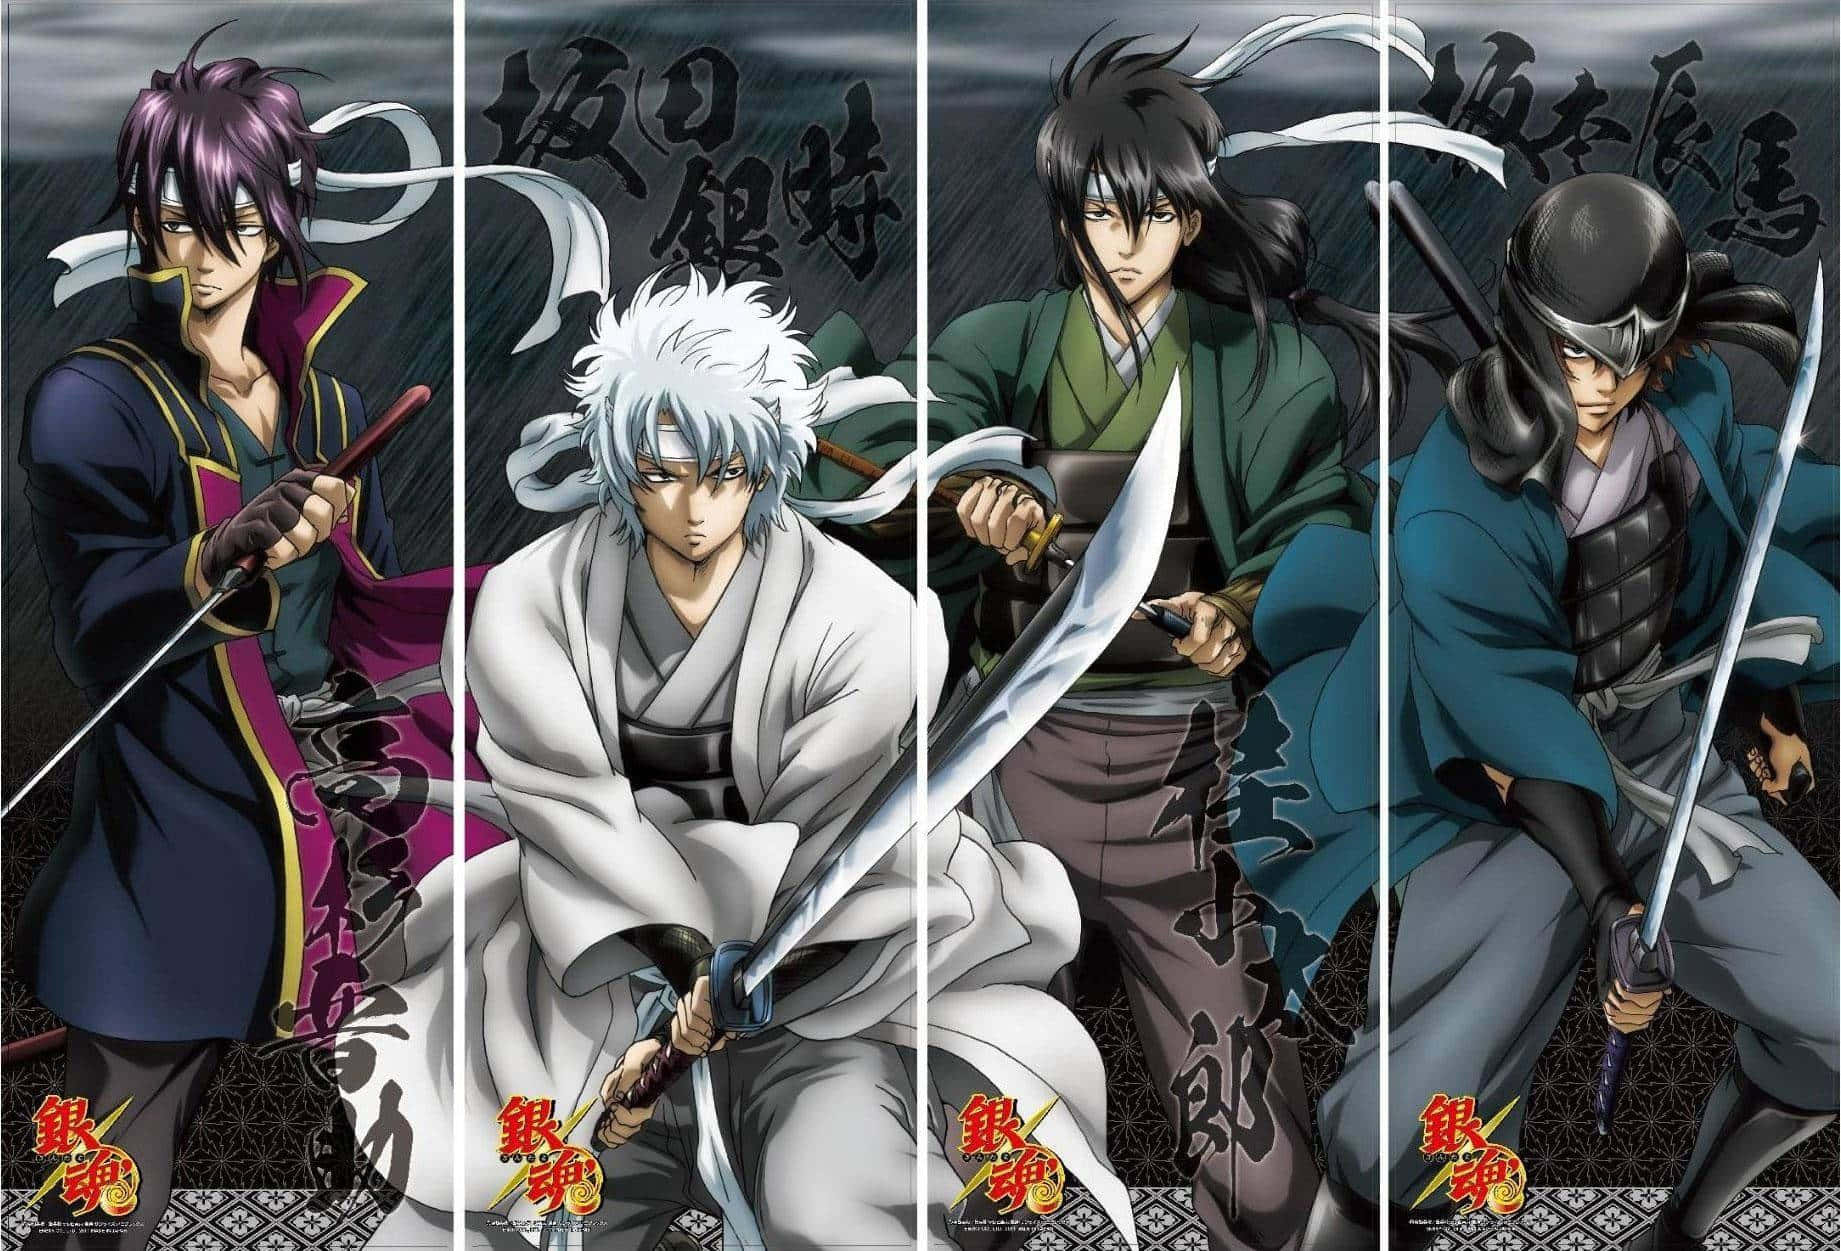 Discover the world of Gintama